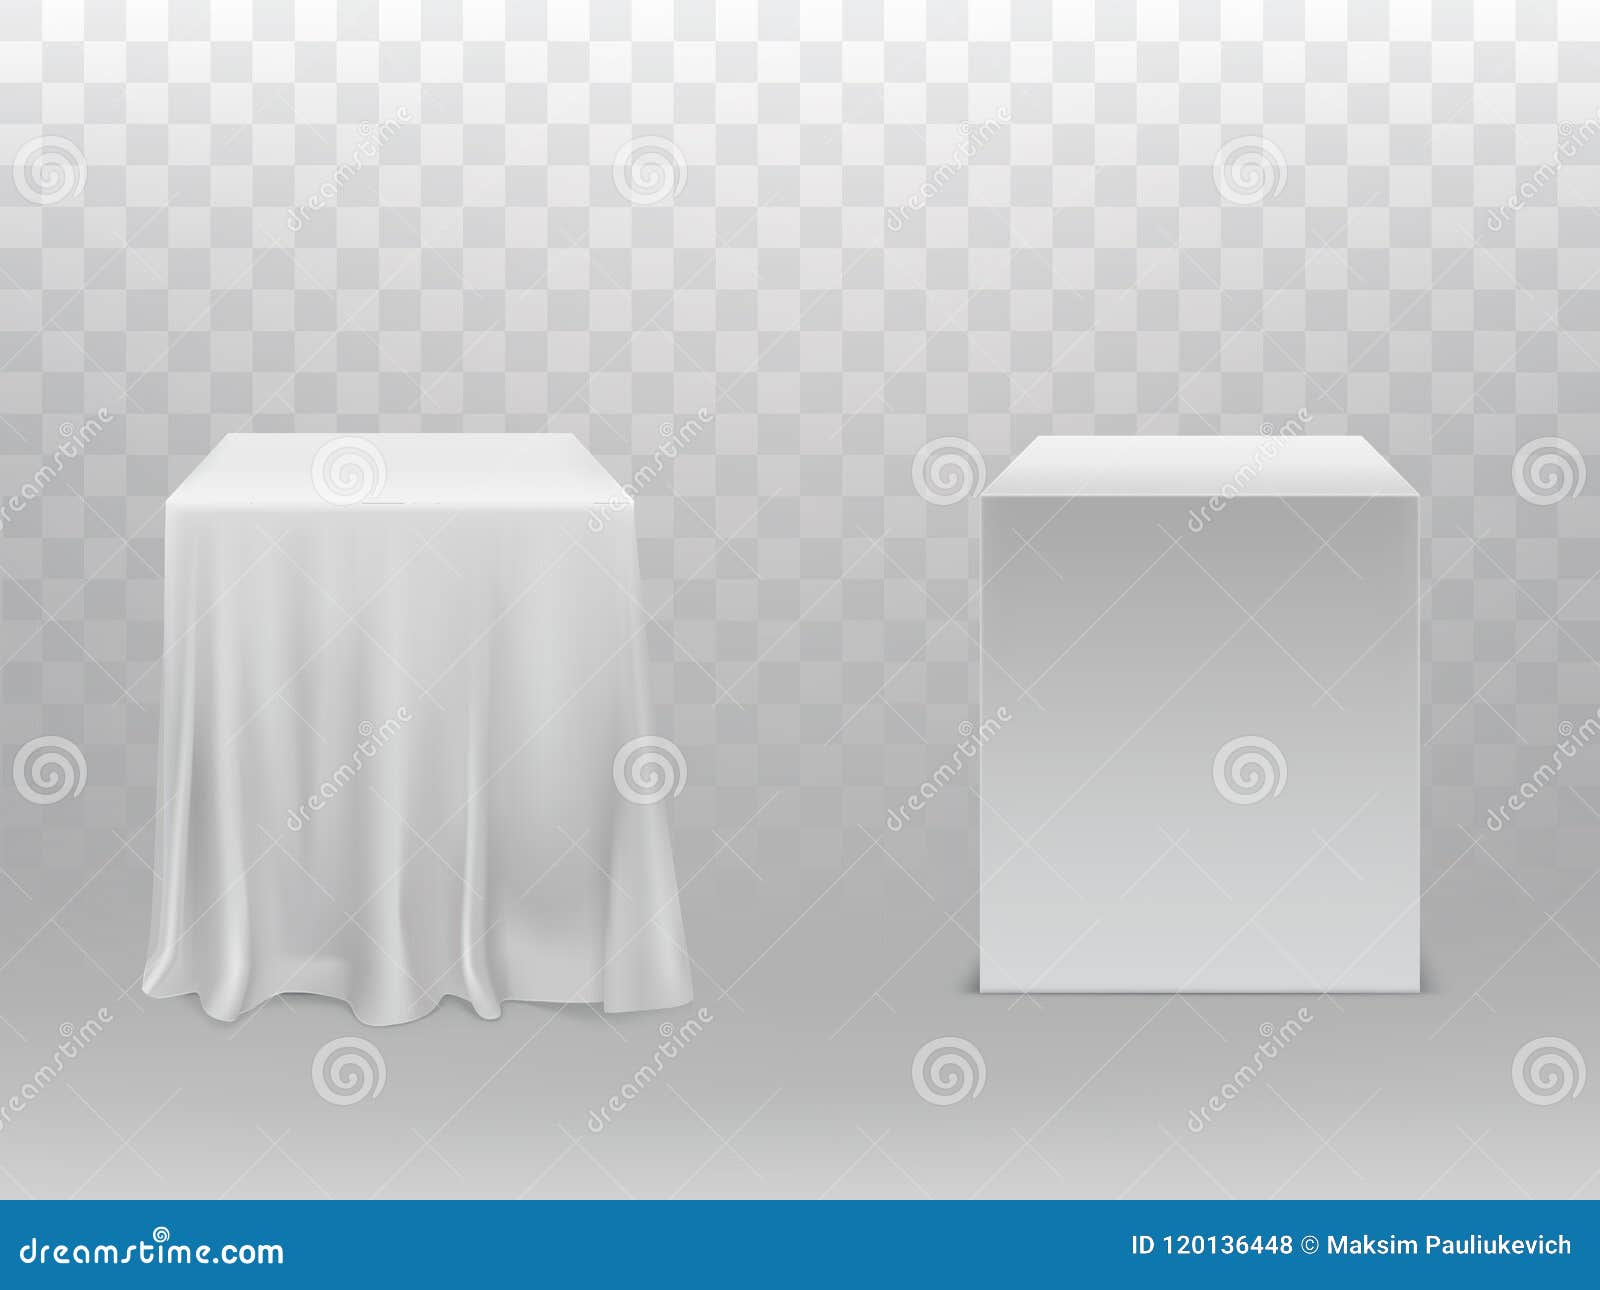 Download Vector Mockup With White Cubes, Blocks Or Boxes Stock Vector - Illustration of cover, design ...